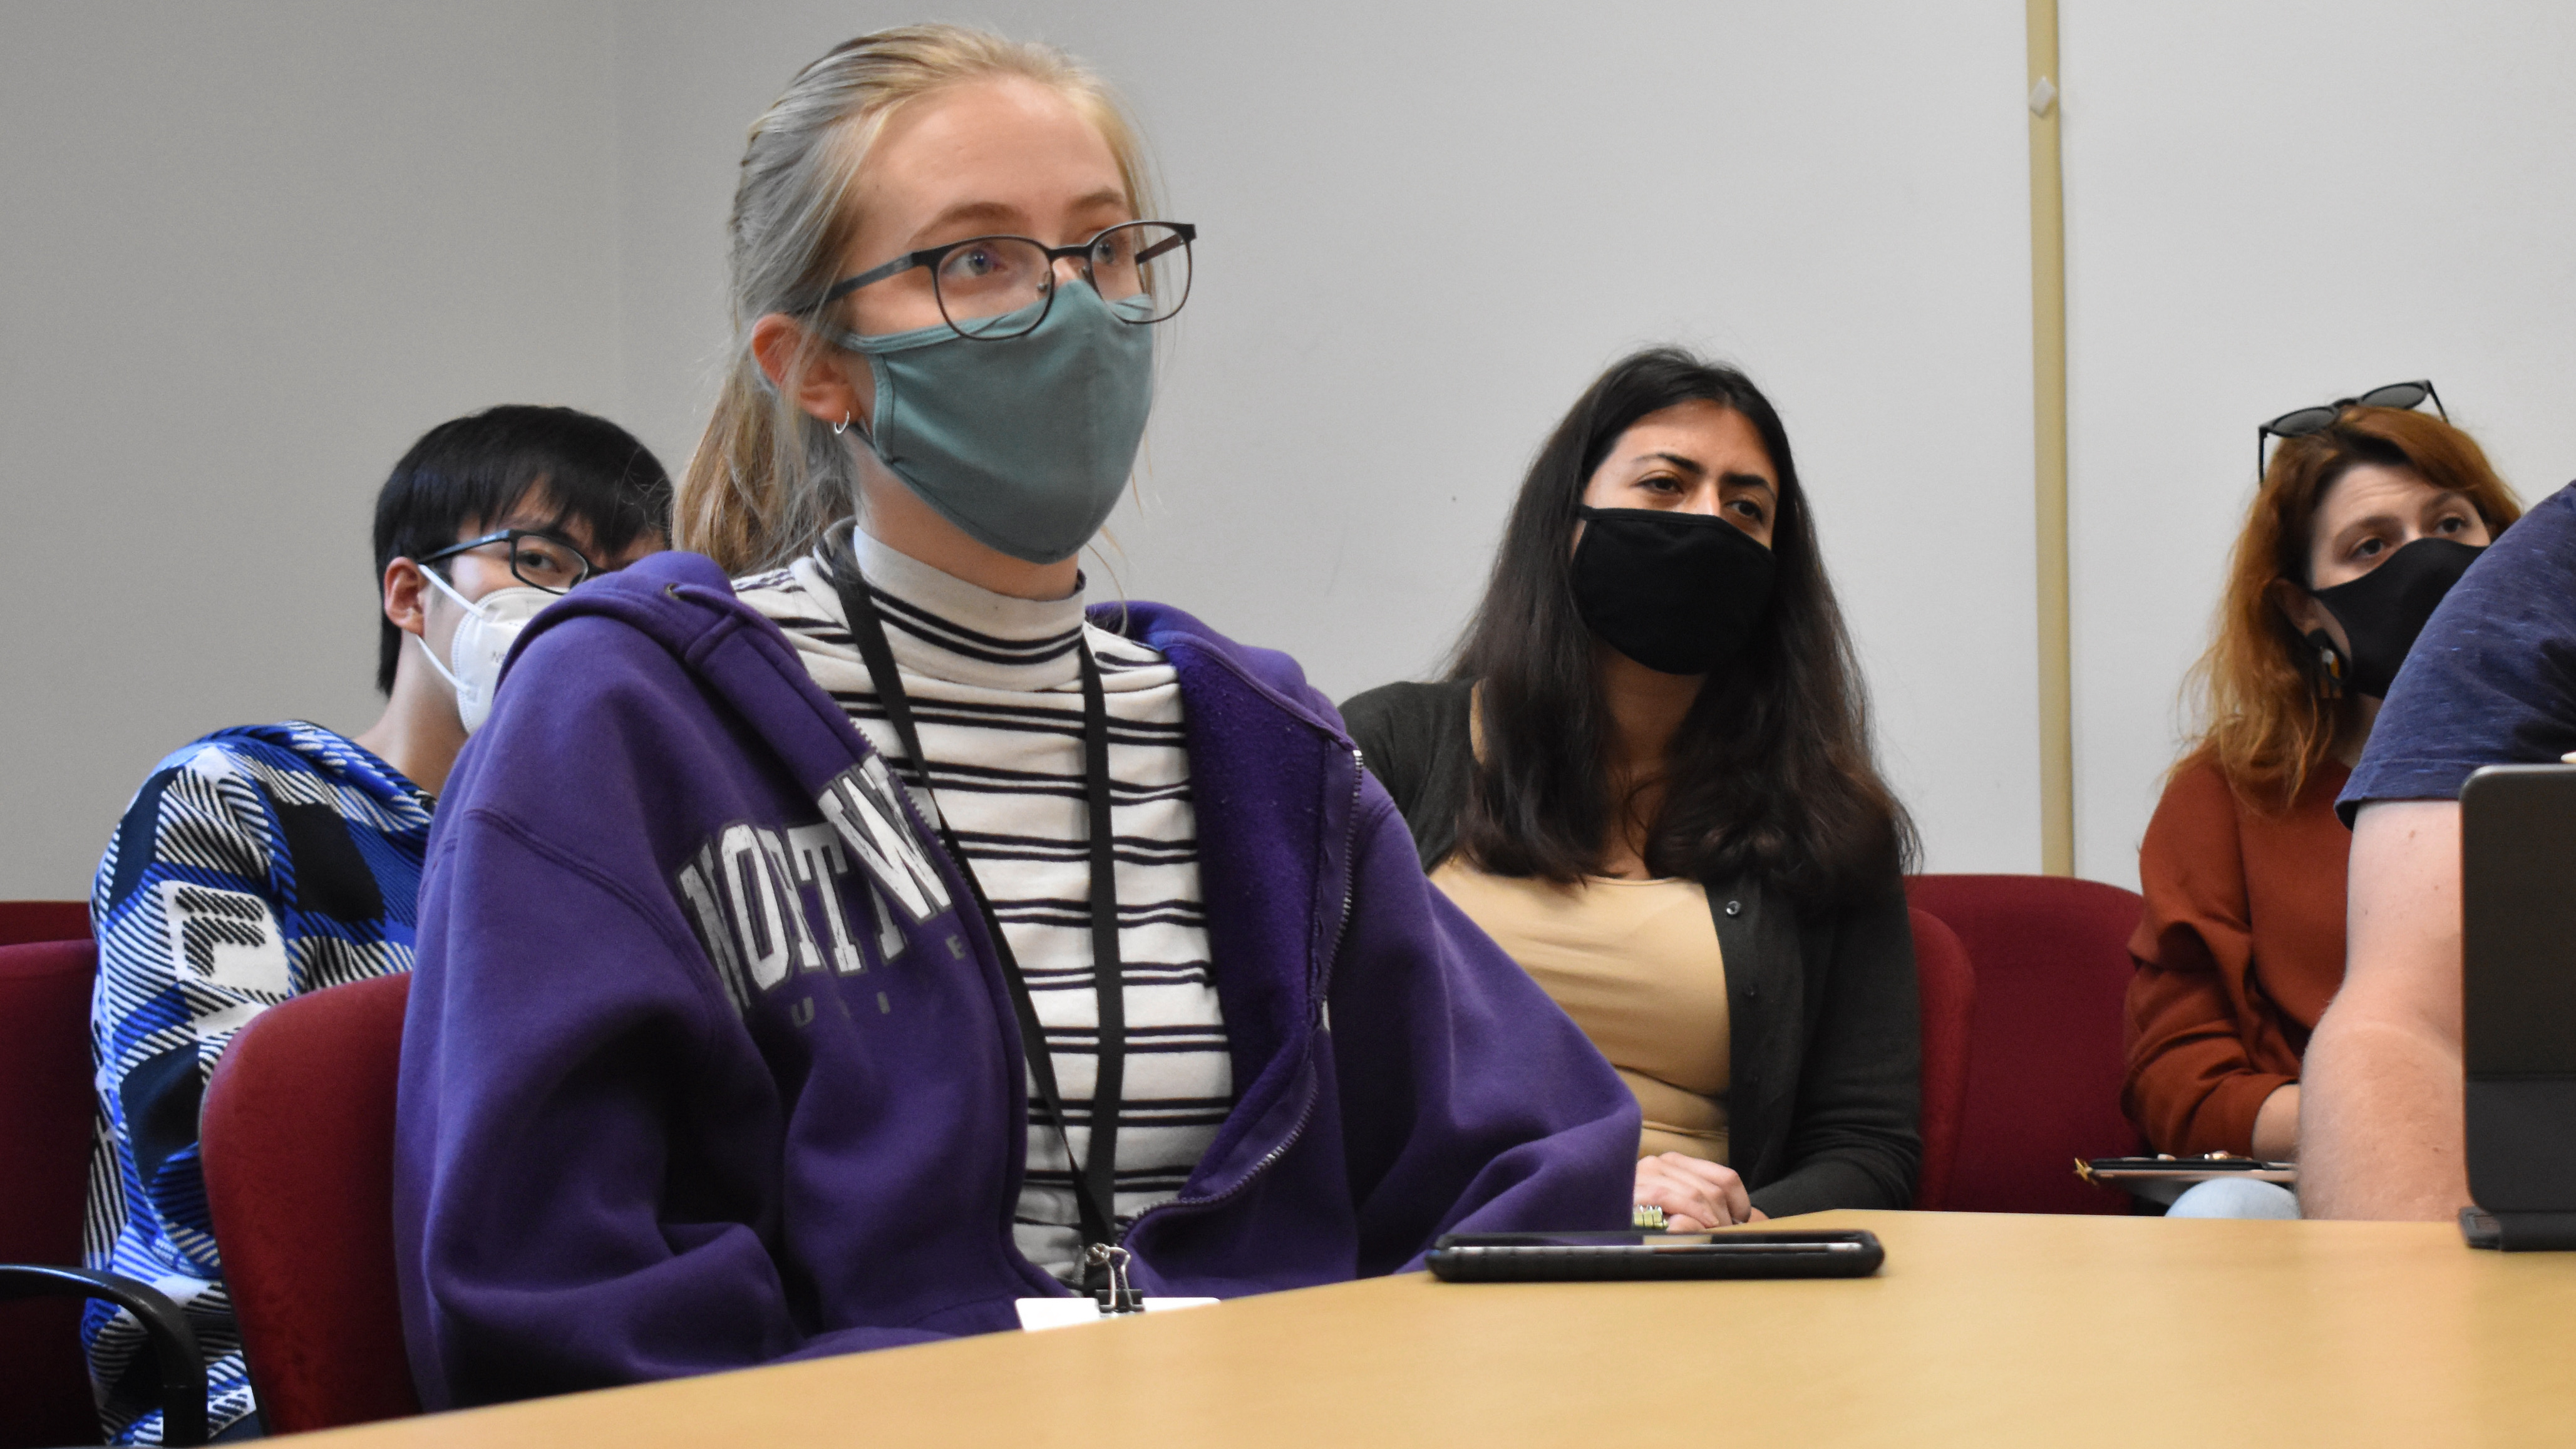 A young woman in a purple sweatshirt and a covid facemask, sitting at a table and listening intently to a seminar discussion